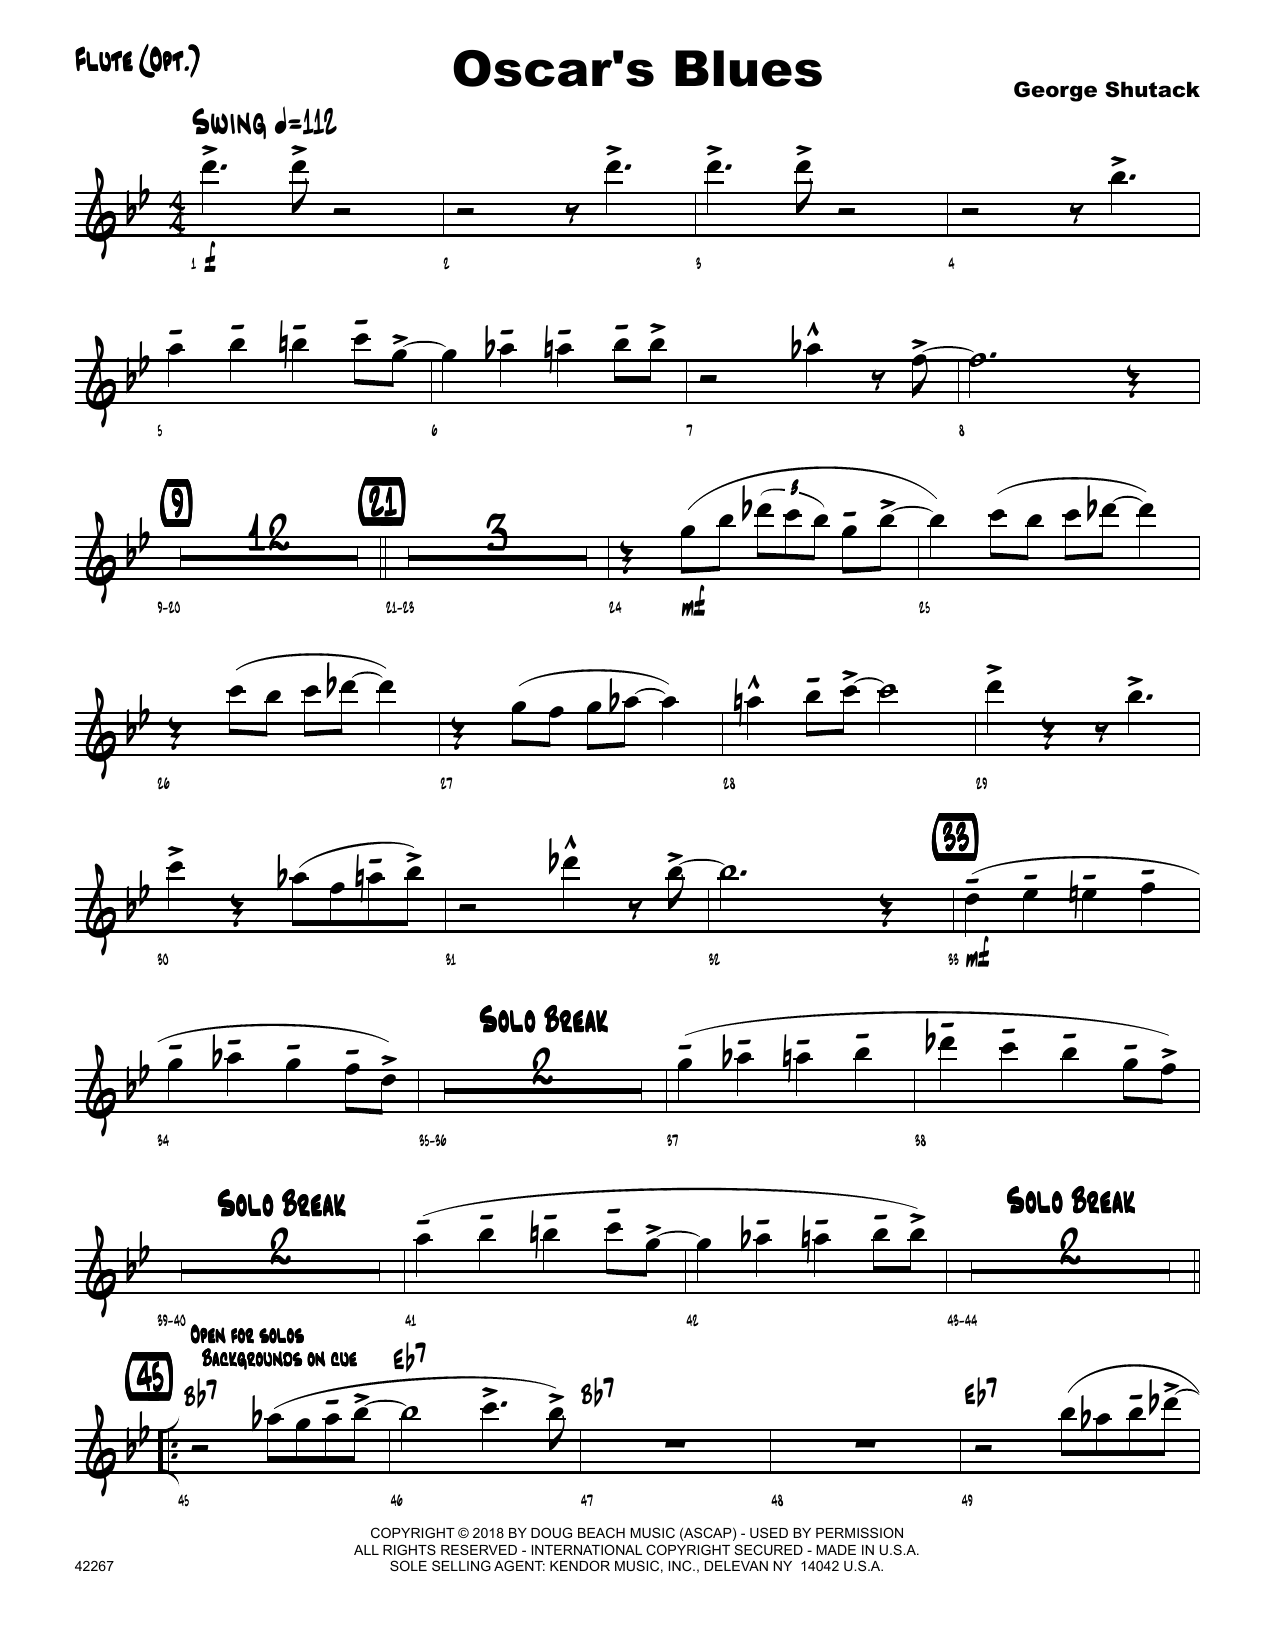 George Shutack Oscar's Blues - Flute sheet music preview music notes and score for Jazz Ensemble including 2 page(s)